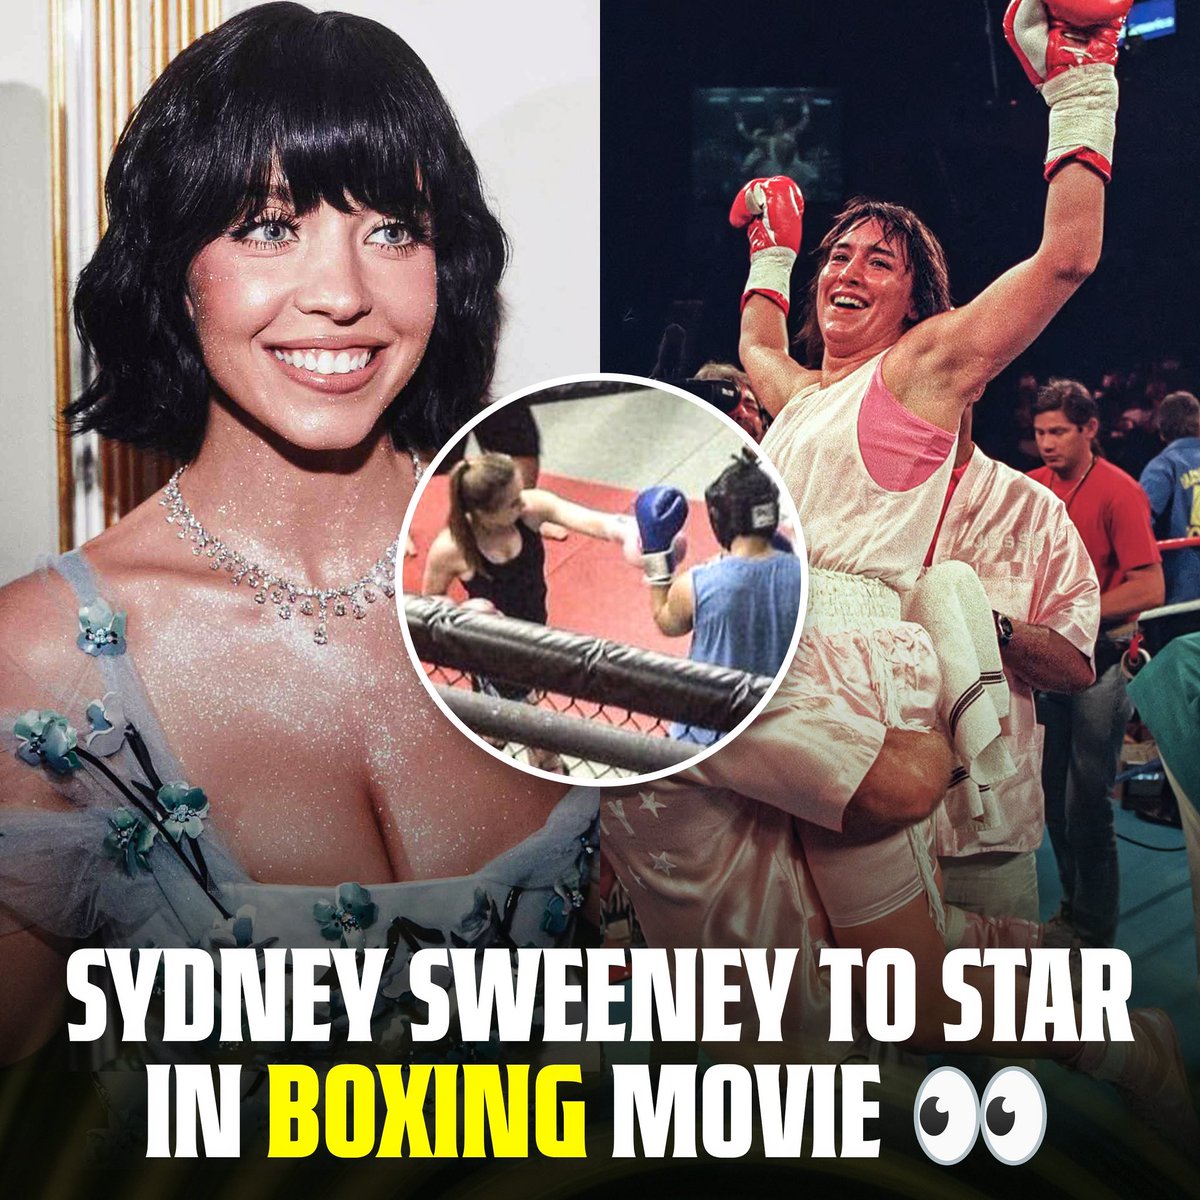 Sydney Sweeney will play ‘The Female Rocky’ Christy Martin in an upcoming movie 🤩 “I grappled & did kickboxing from 12-19 years old. I’ve been itching to get back into the ring, train & transform my body” (via Deadline)